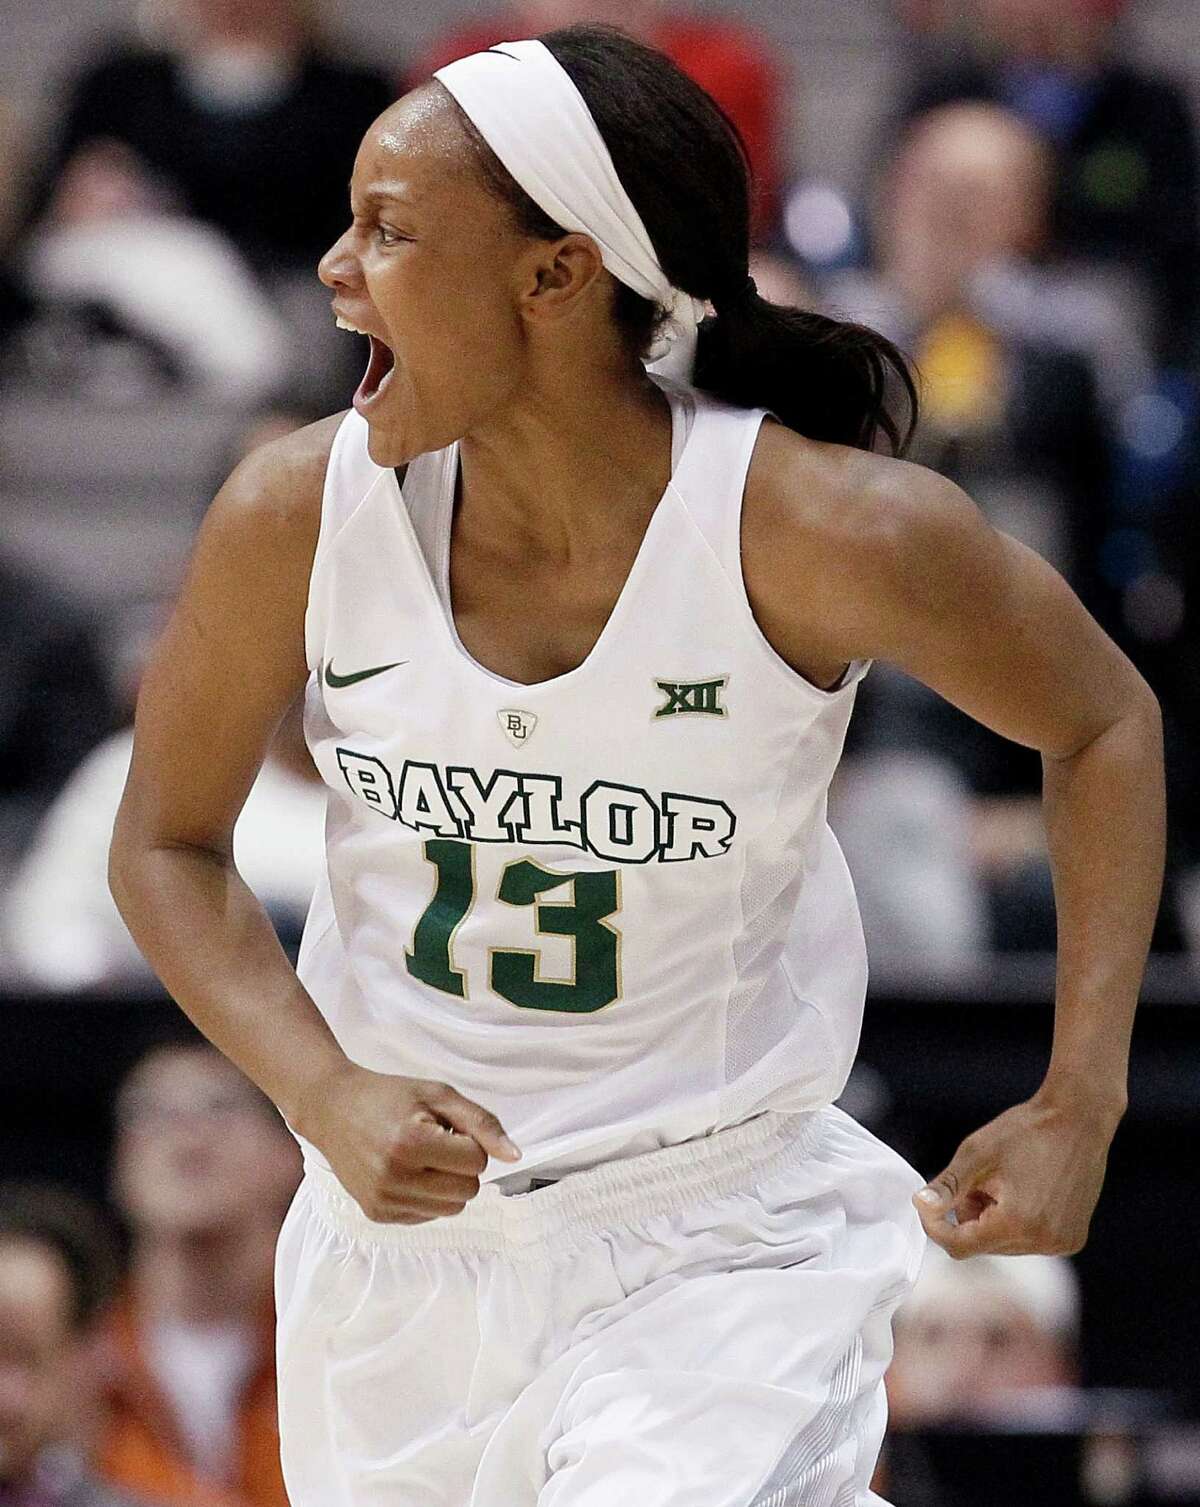 Nina Davis celebrates a basket that helped Baylor get off to a fast start Monday in its victory over Texas. Davis had 14 points in the first half as Baylor built a five-point halftime lead.